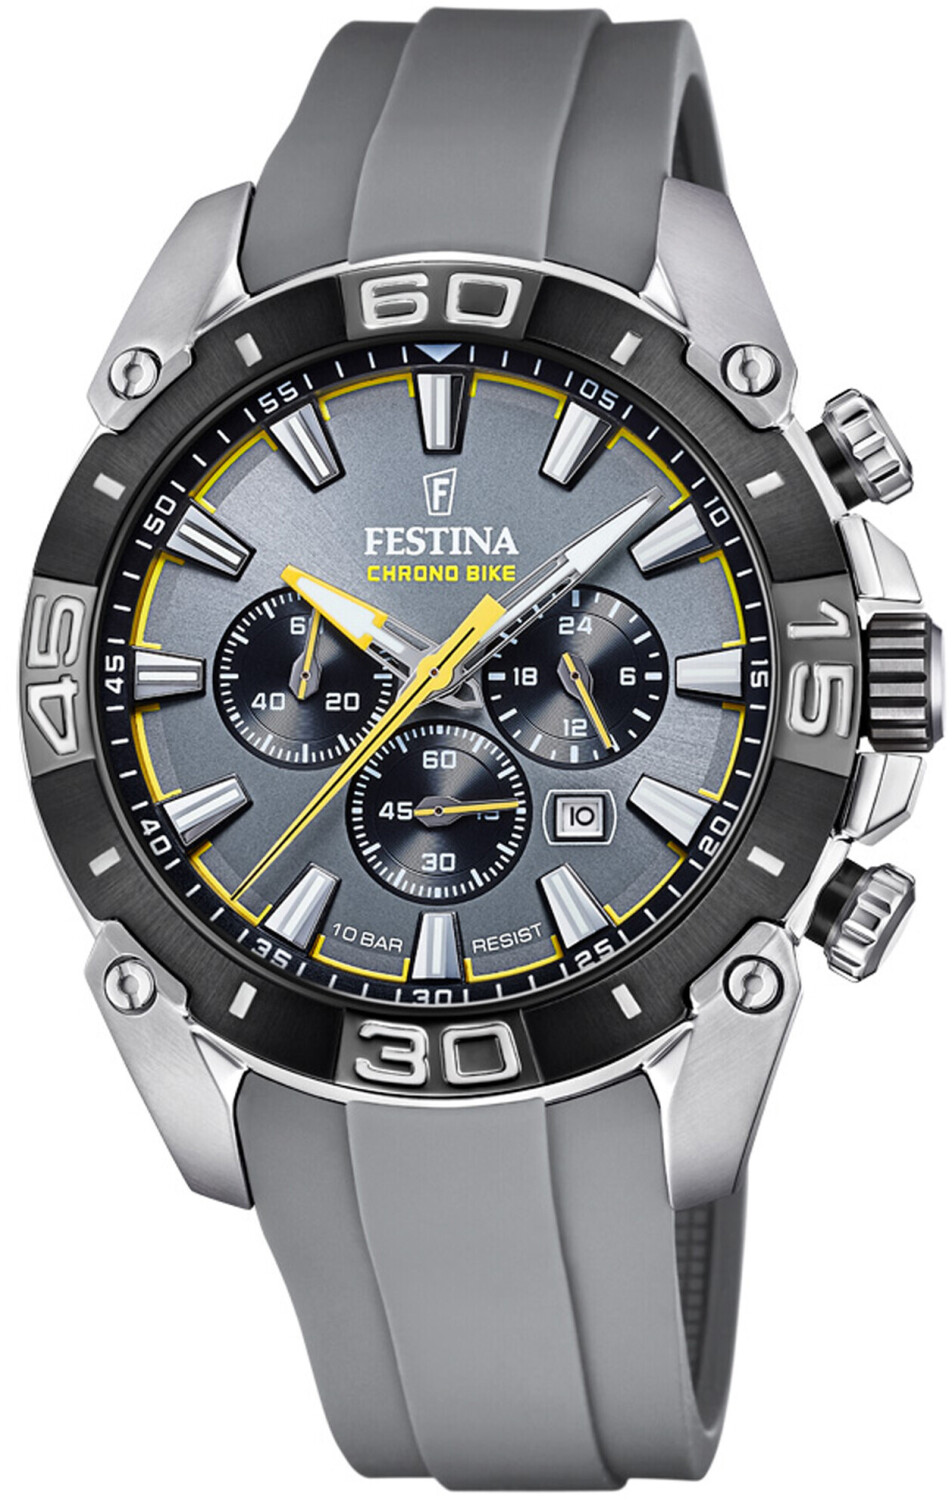 on from Deals £152.00 F20544 Festina (Today) Chrono Buy Bike – Best